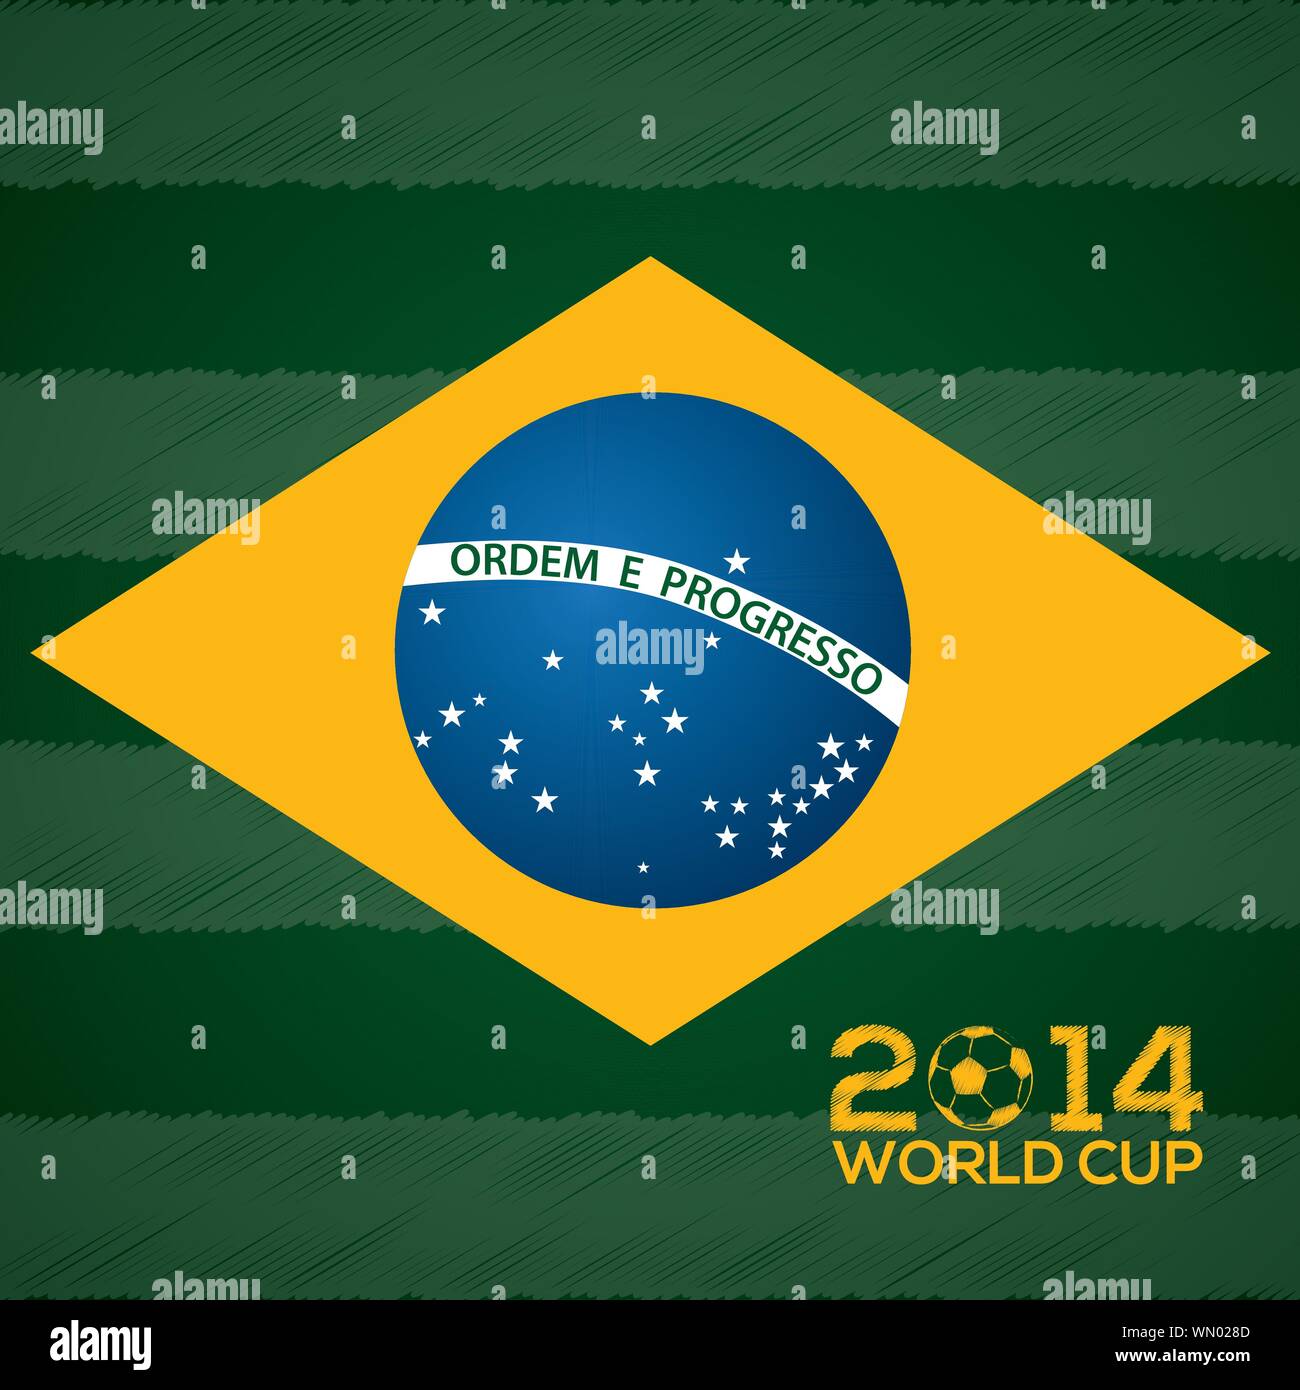 Poster design with Brasil flag and 2014 world cup text Stock Vector